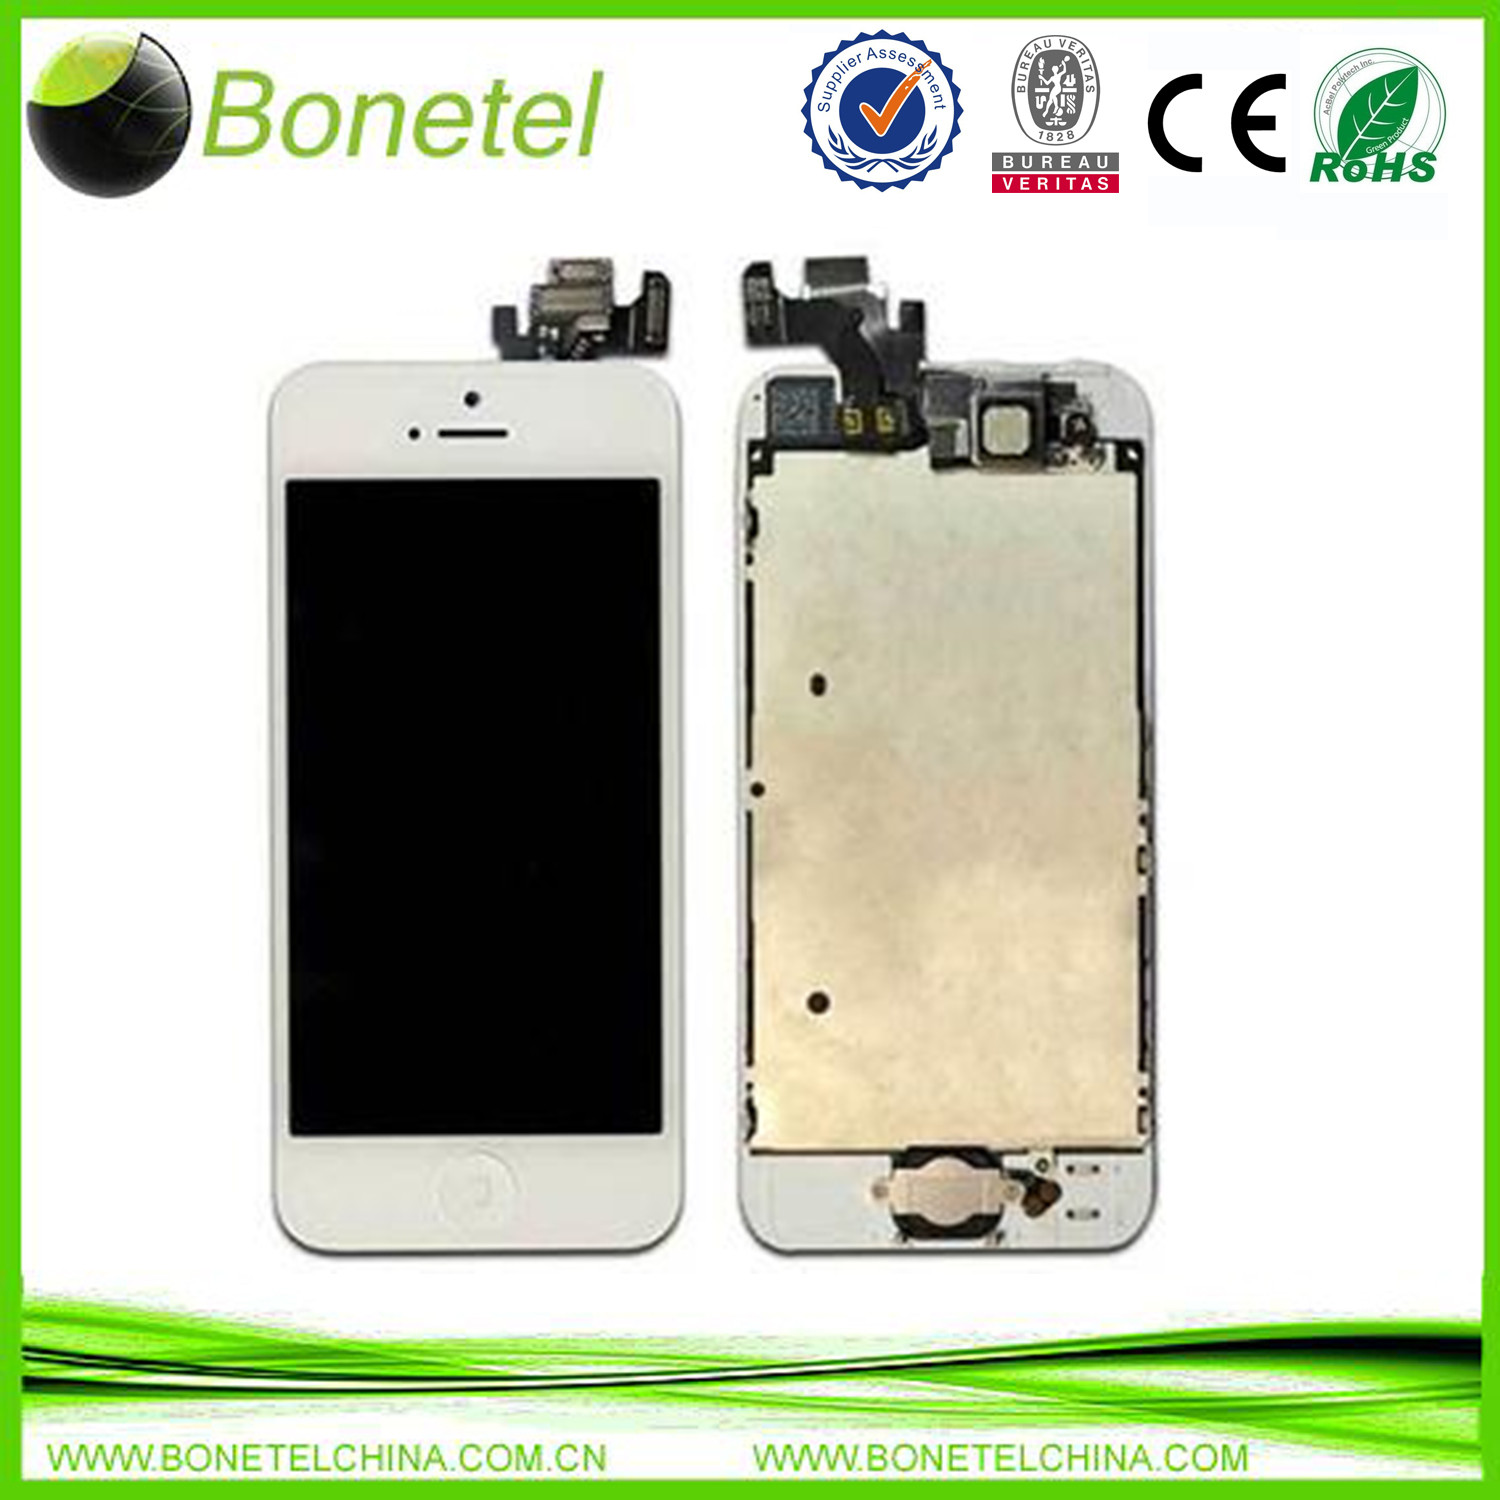 White LCD Display Touch Screen Digitizer Assembly for iPhone 5 5G